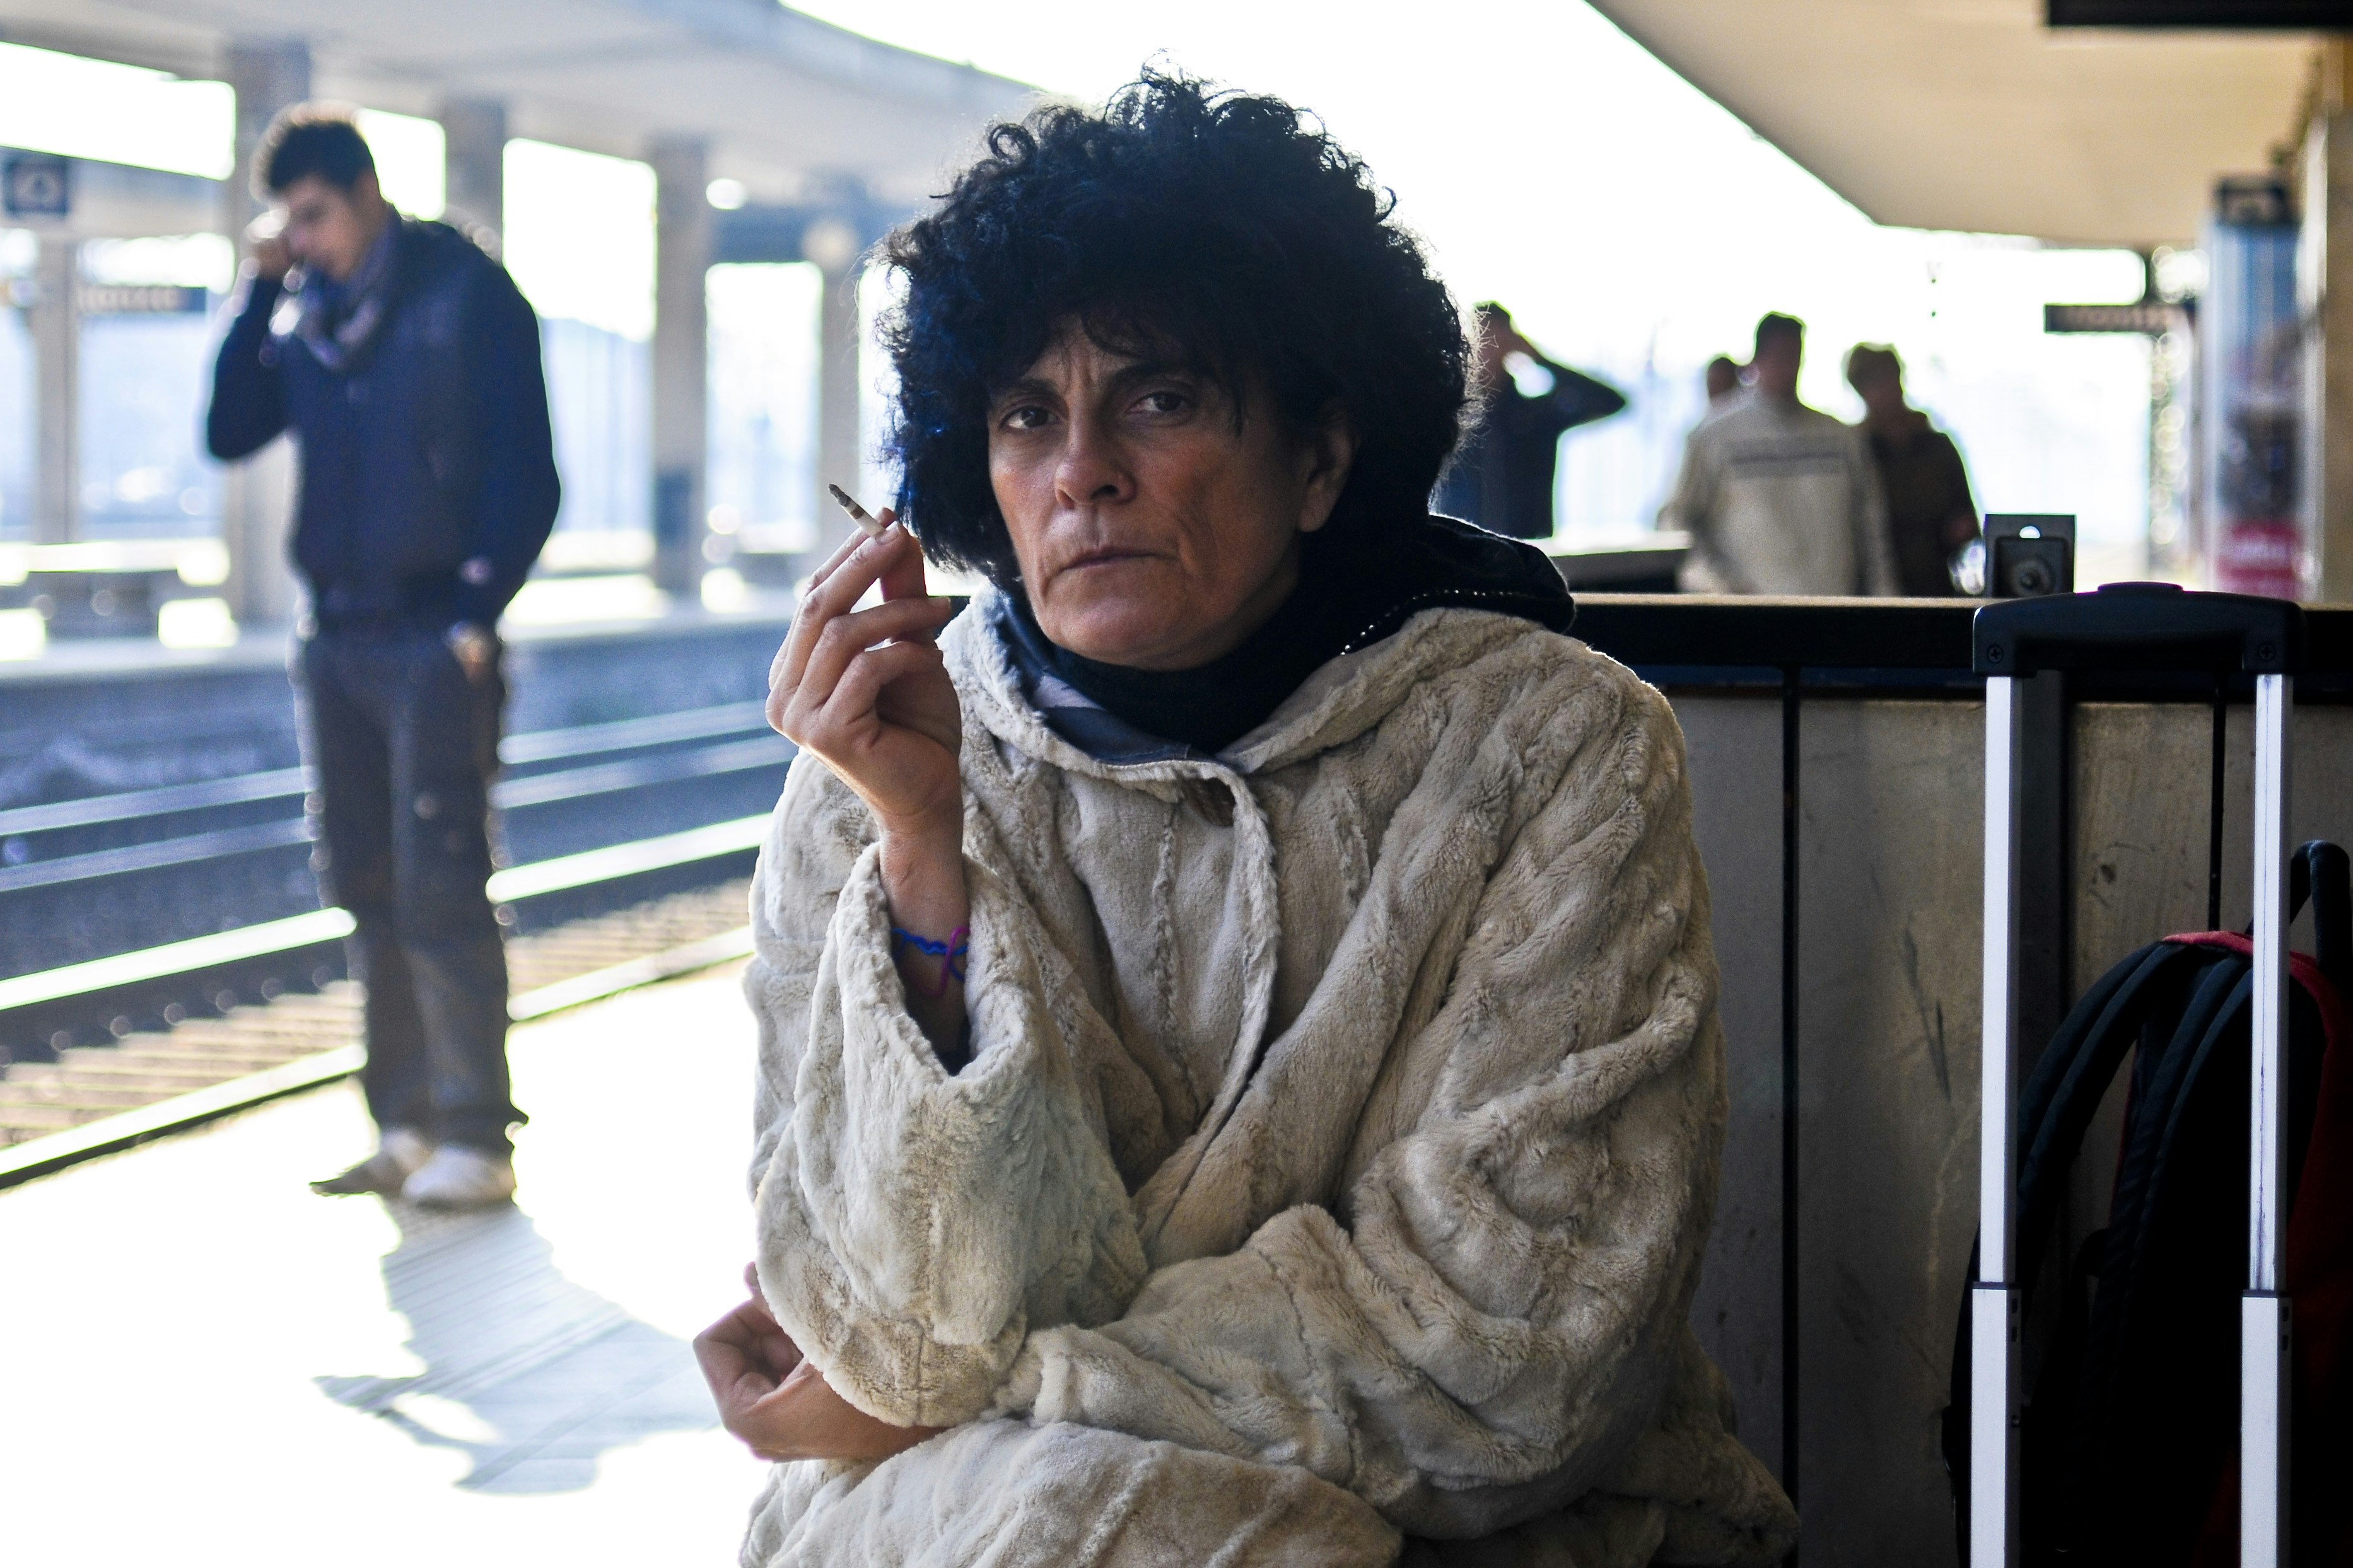 An old, moody lady smoking at a train station.